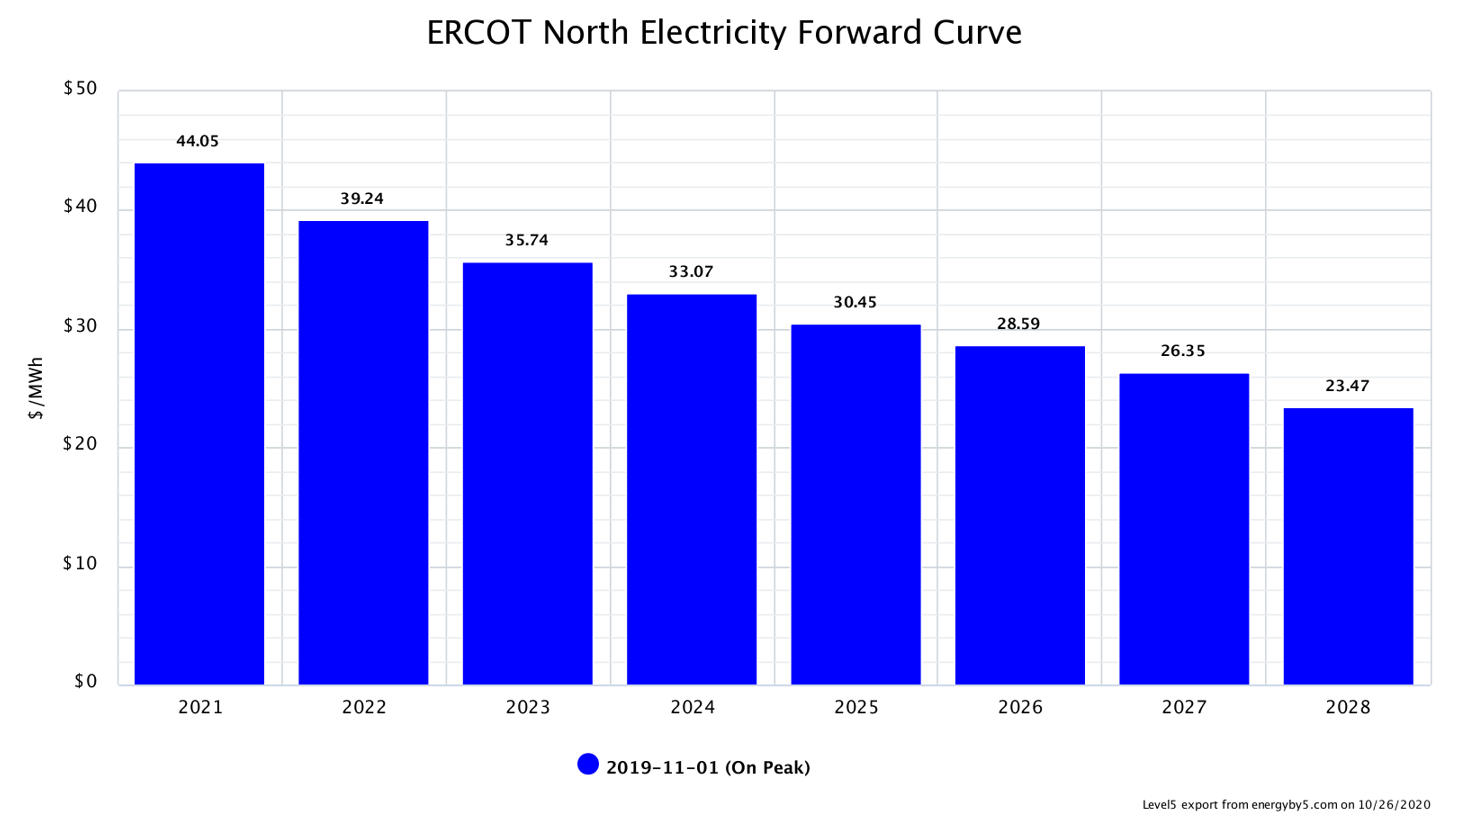 ERCOT North Electricity Forward Curve